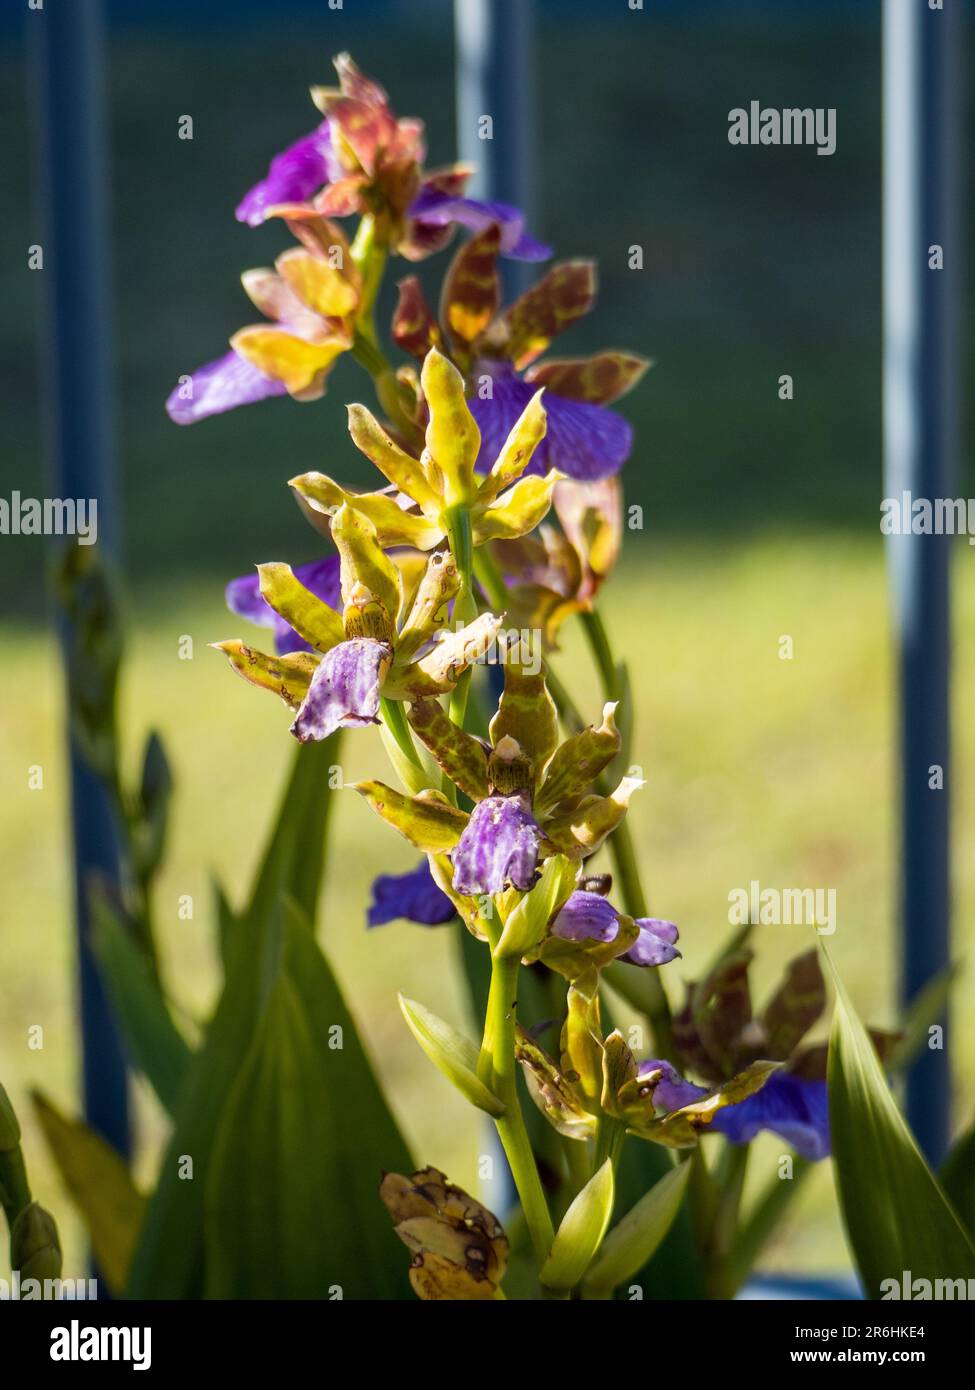 A tall stem of purple with dark red and yellow patterns Zygopetalum orchid flowers in the morning sunlight, Australian coastal garden Stock Photo